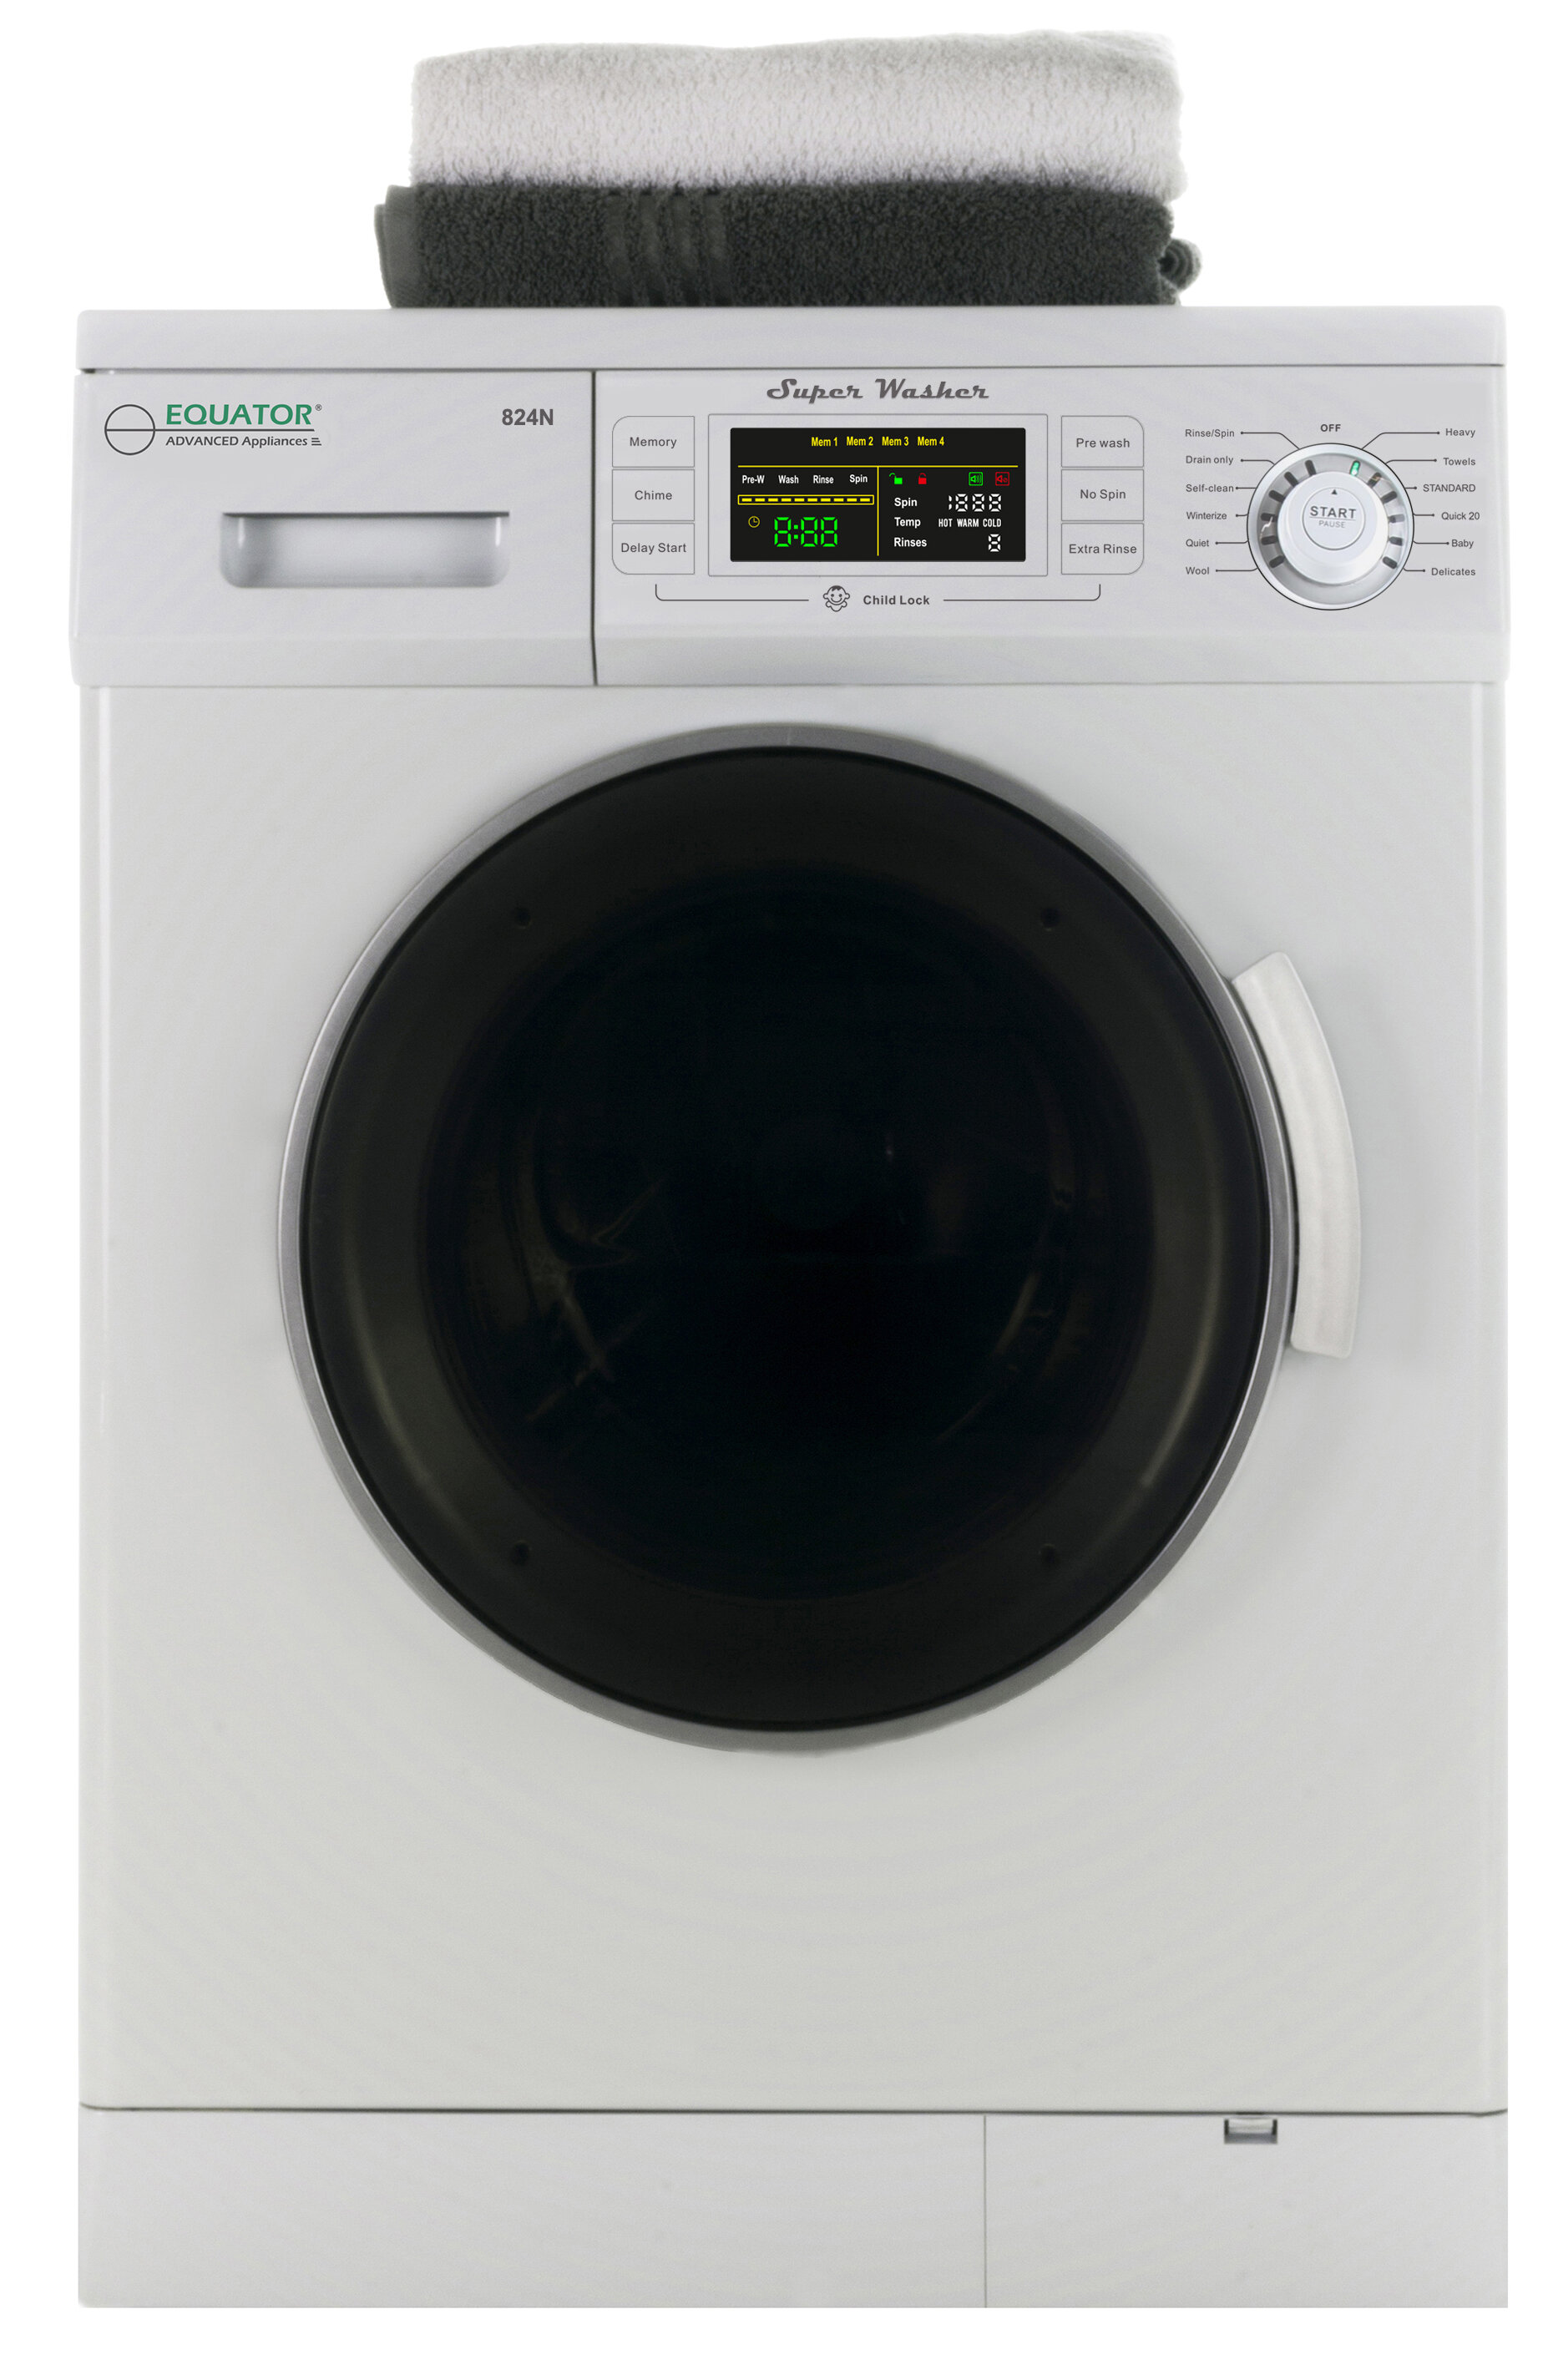 Equator Advanced Appliances 2.6-cu ft Portable Electric Dryer (White) in  the Electric Dryers department at